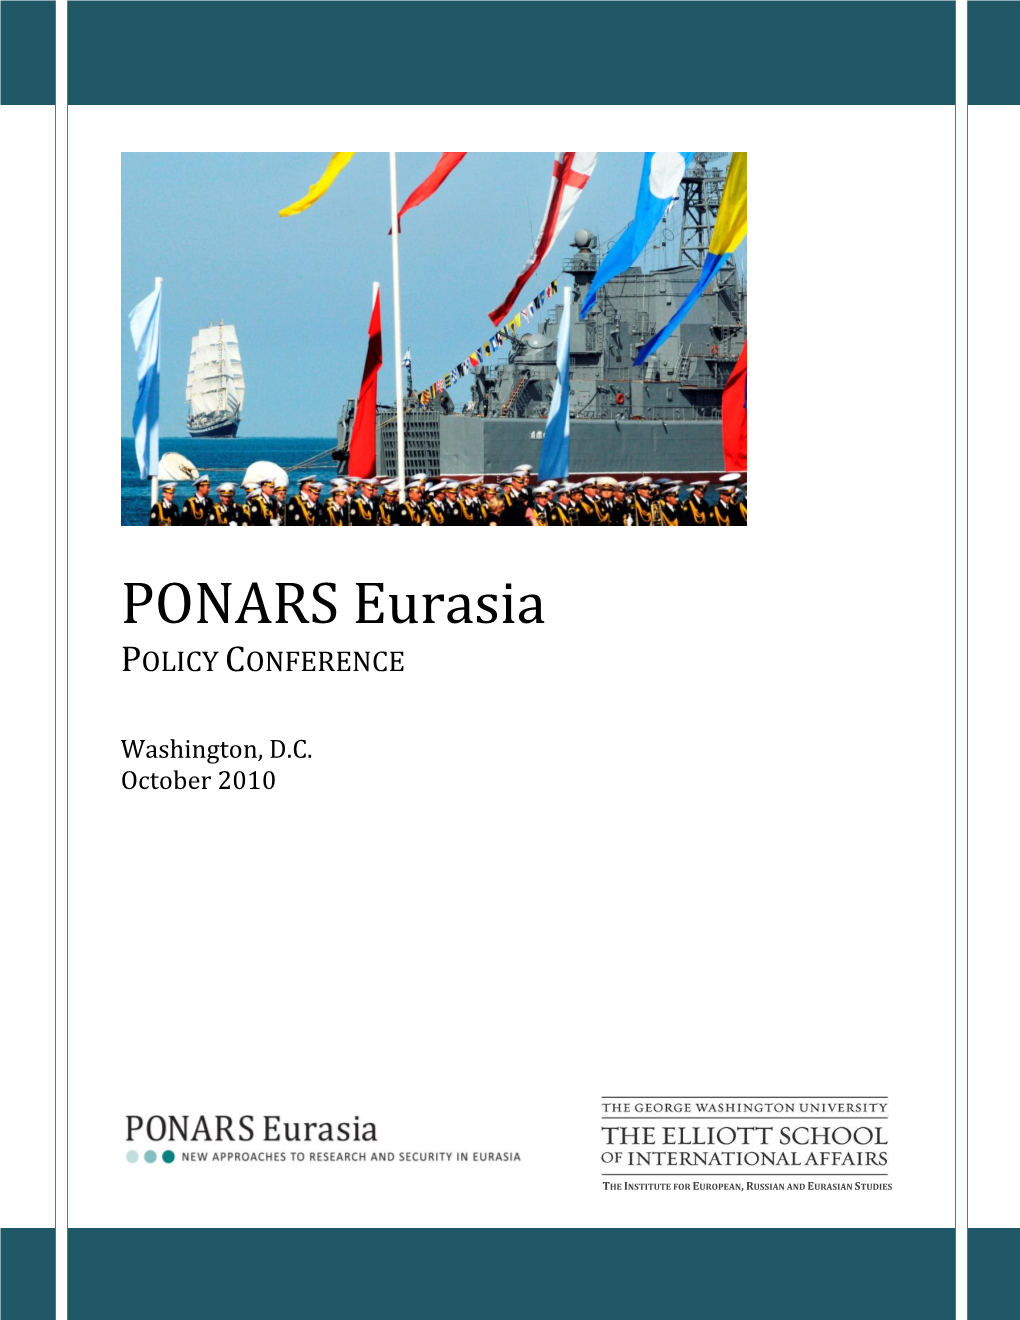 PONARS Eurasia Policy Conference Book Oct2010.Pdf